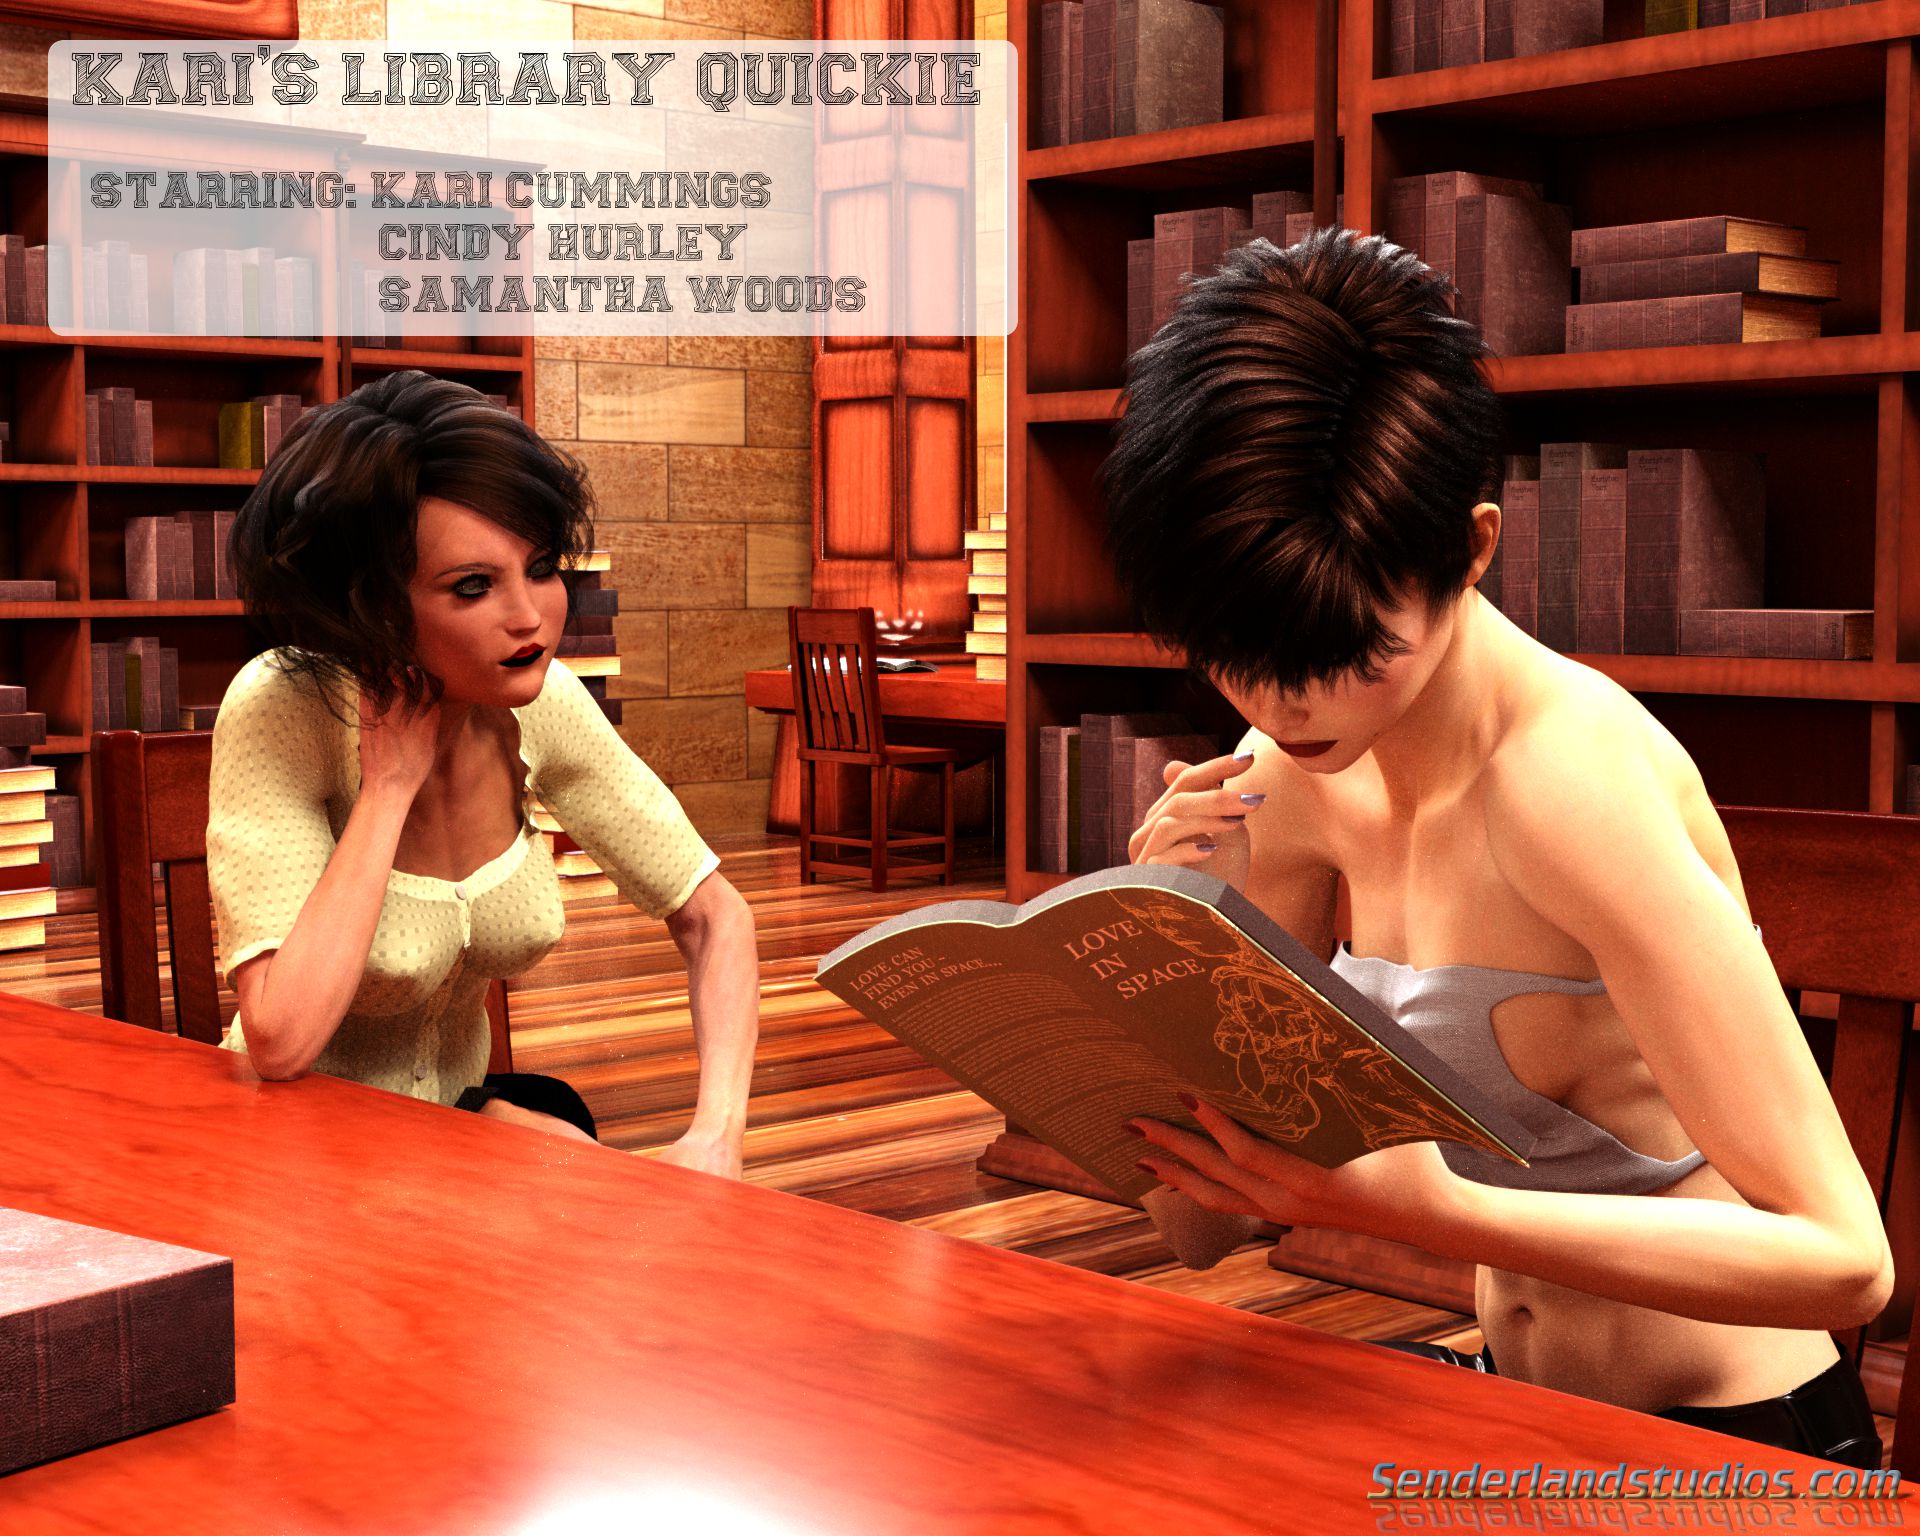 d2ef012c801efa0a892867c70c0e36aa – Kari’s-Library-Quickie-(1)